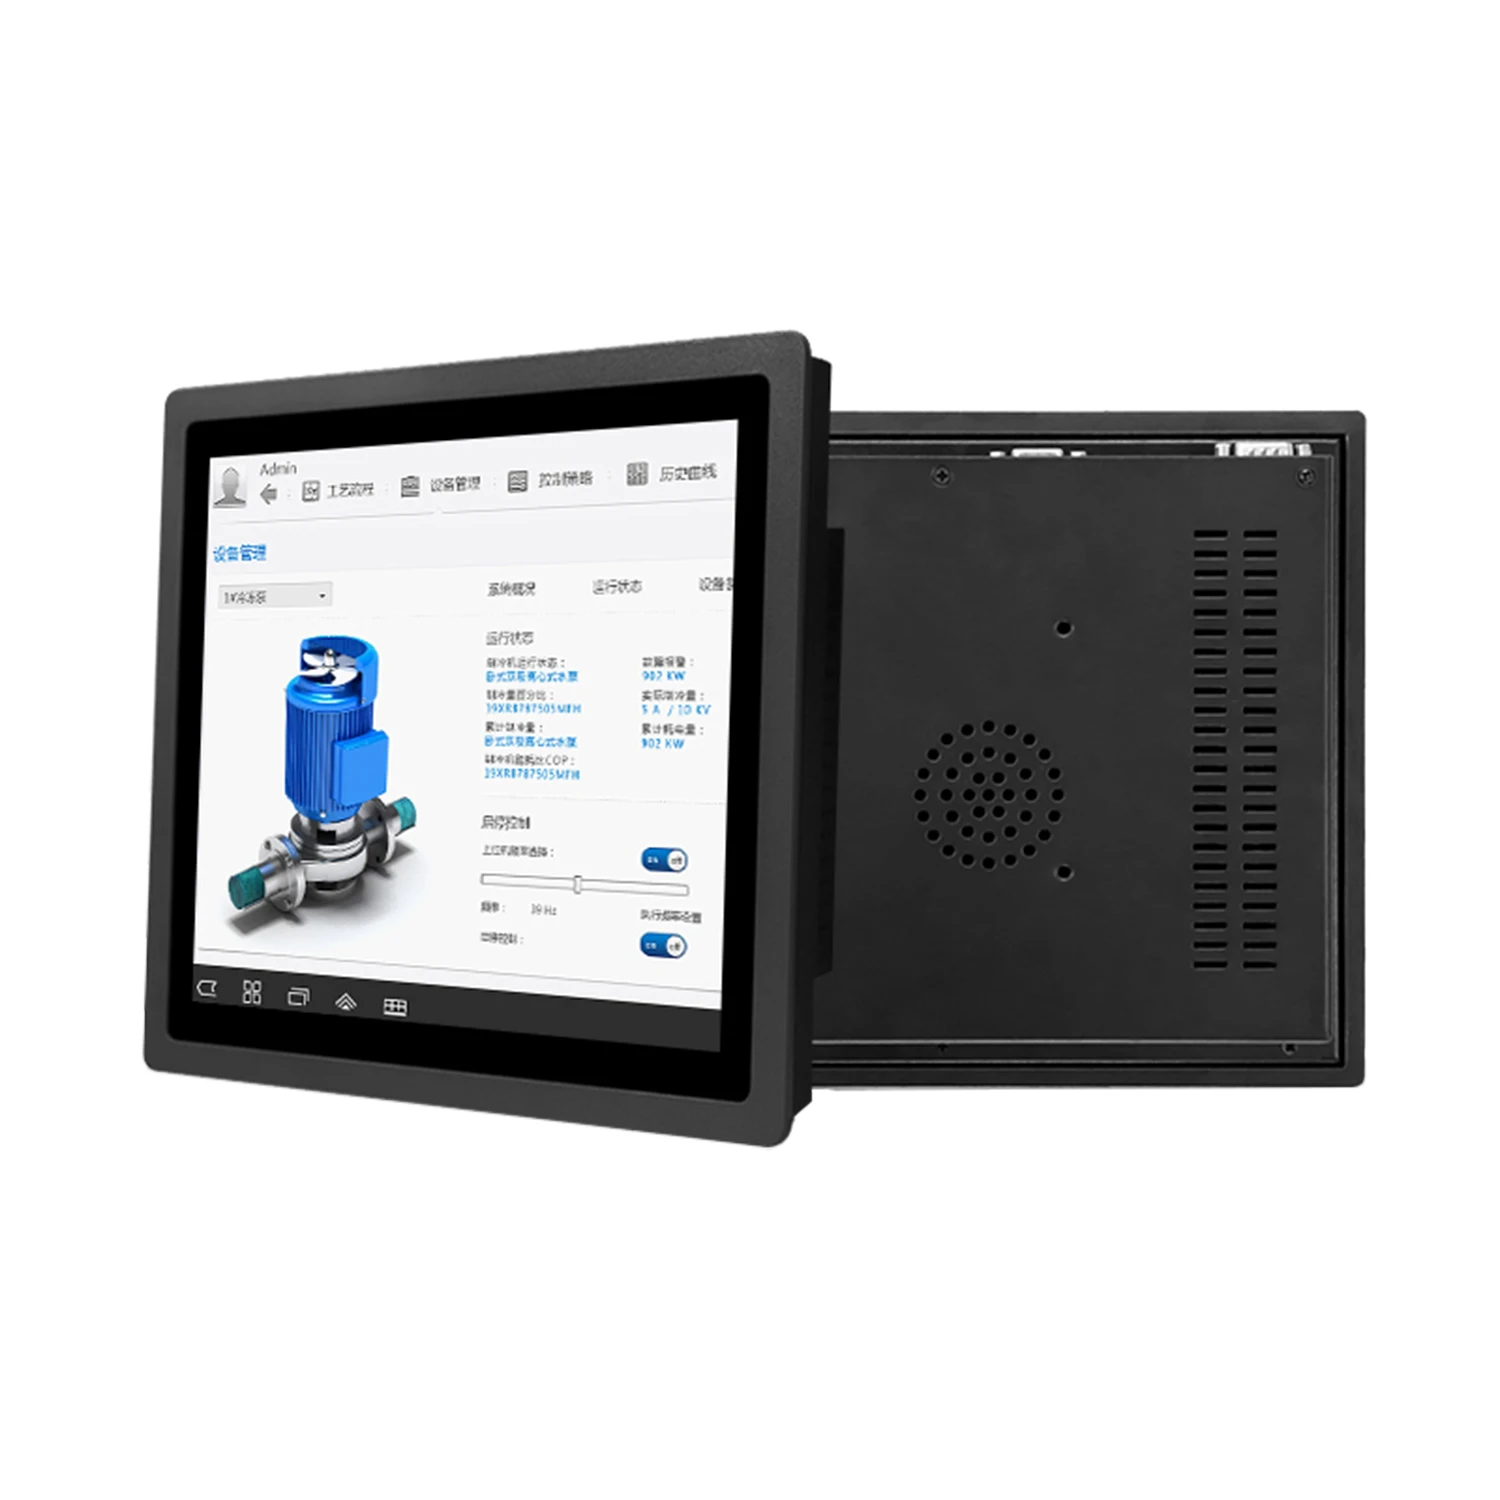 

10.4 Inch Embedded Industrial Tablet PC Panel All-in-one Mini Computer with Capacitive Touch Screen Built-in WiFi 1024*768